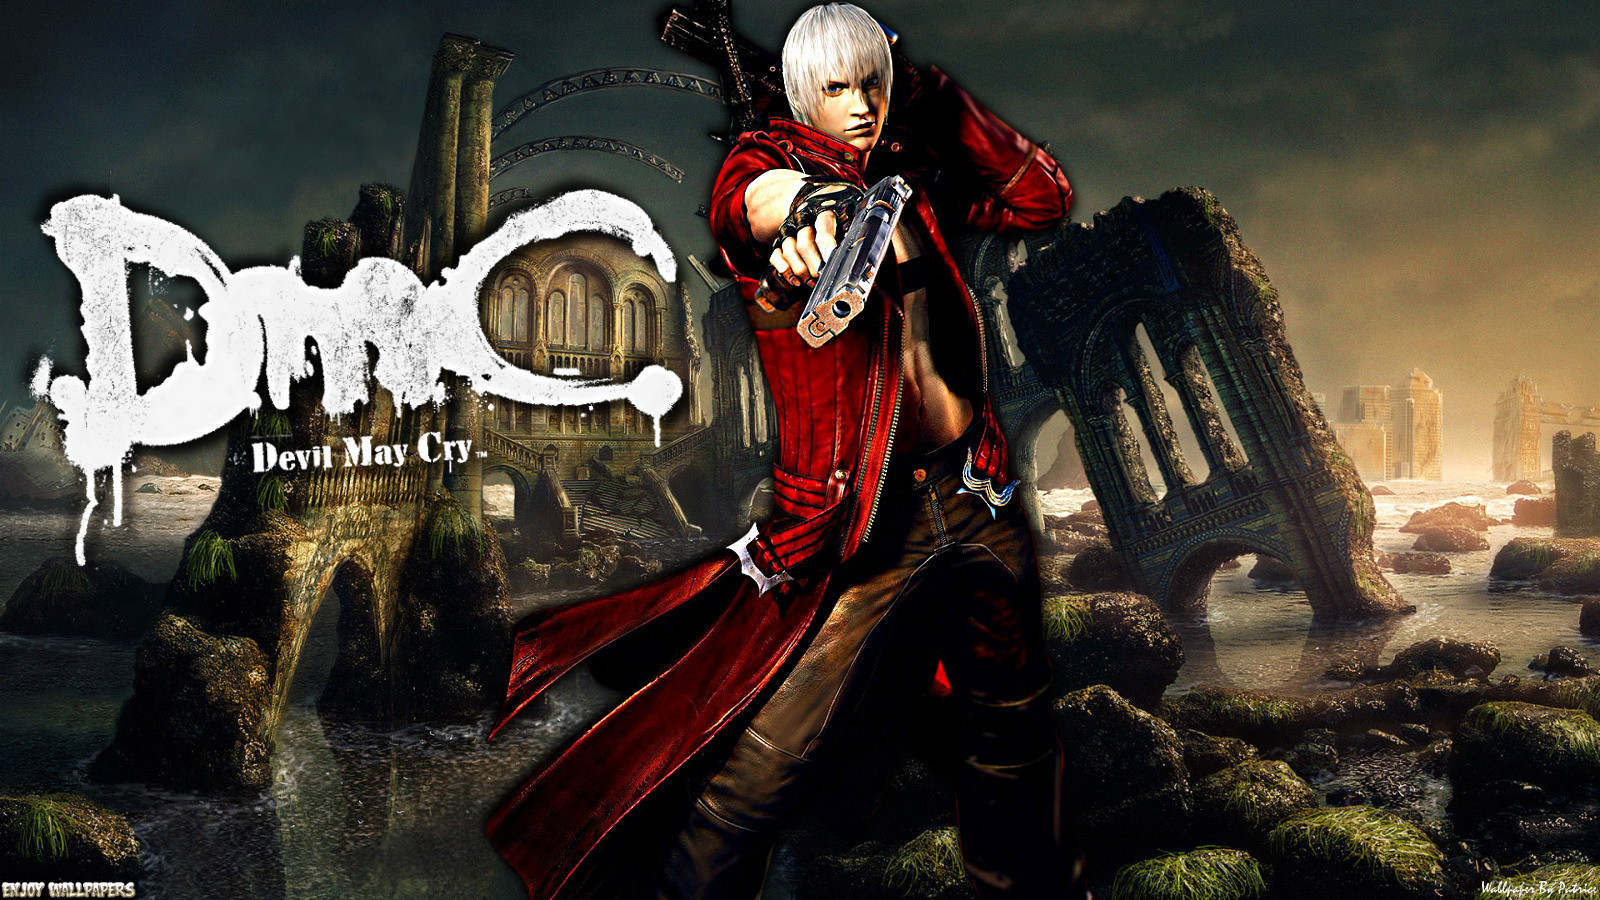 Devil May Cry DMC Wallpapers for all DMCs fans